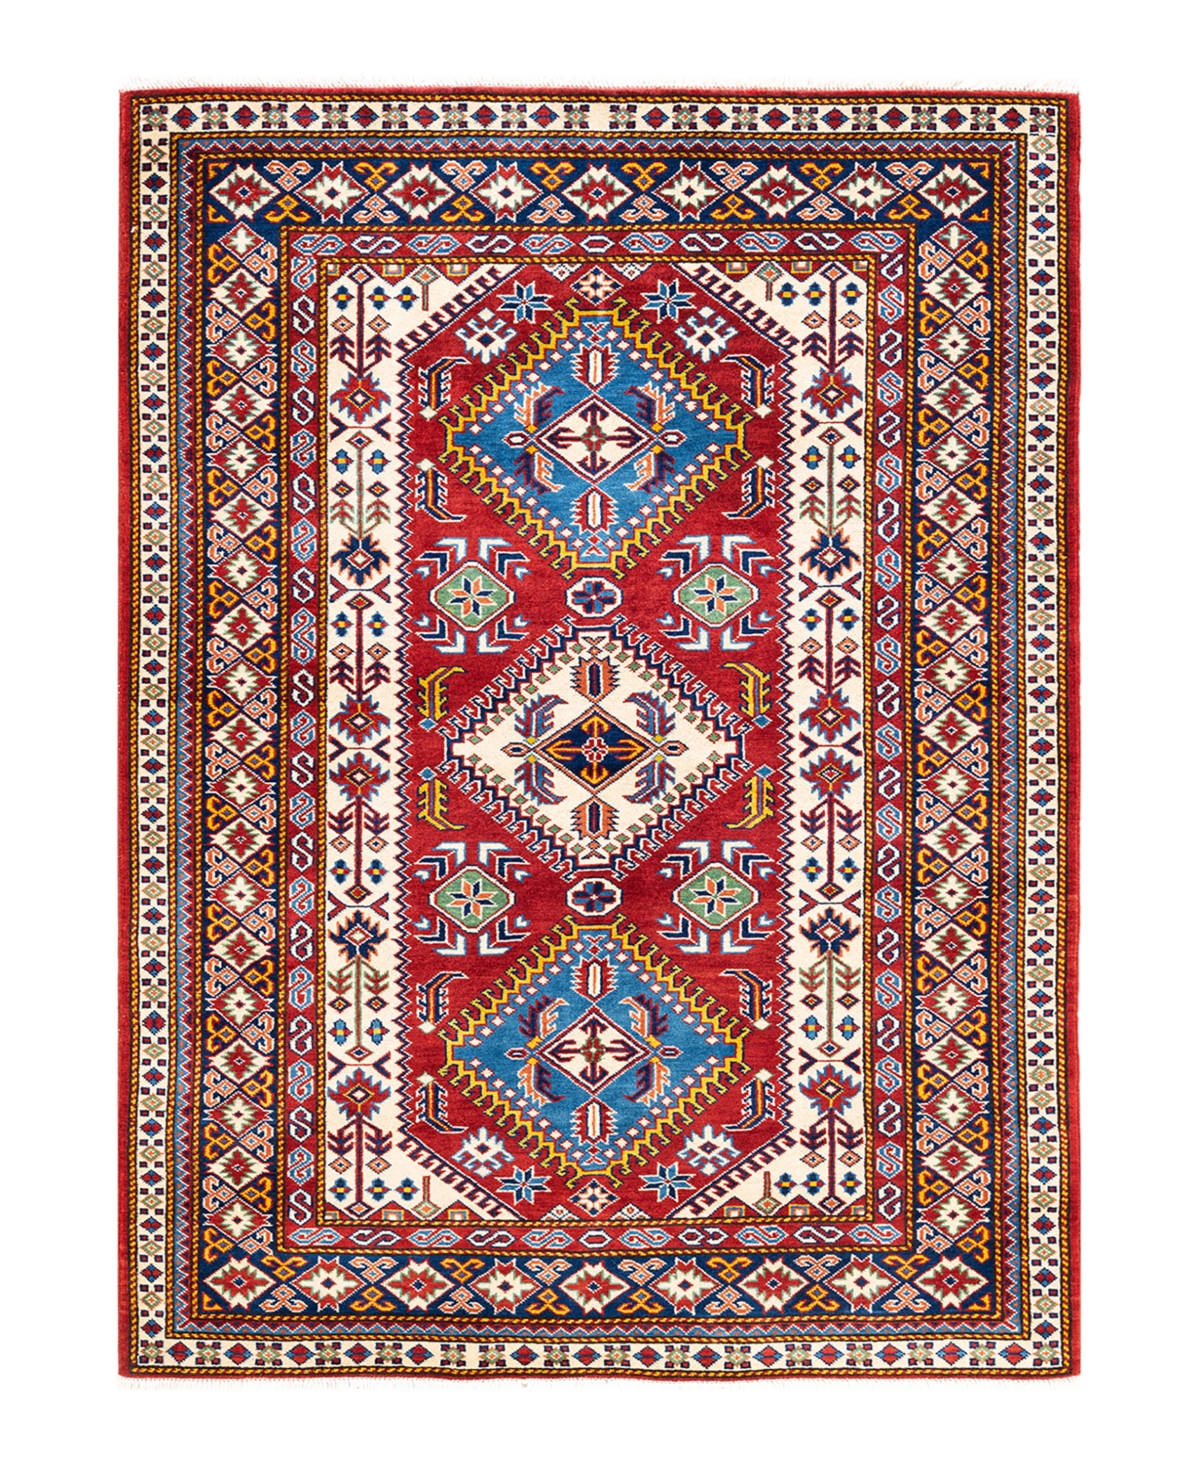 Adorn Hand Woven Rugs Tribal M18734 4'3in x 5'10in Area Rug - Red